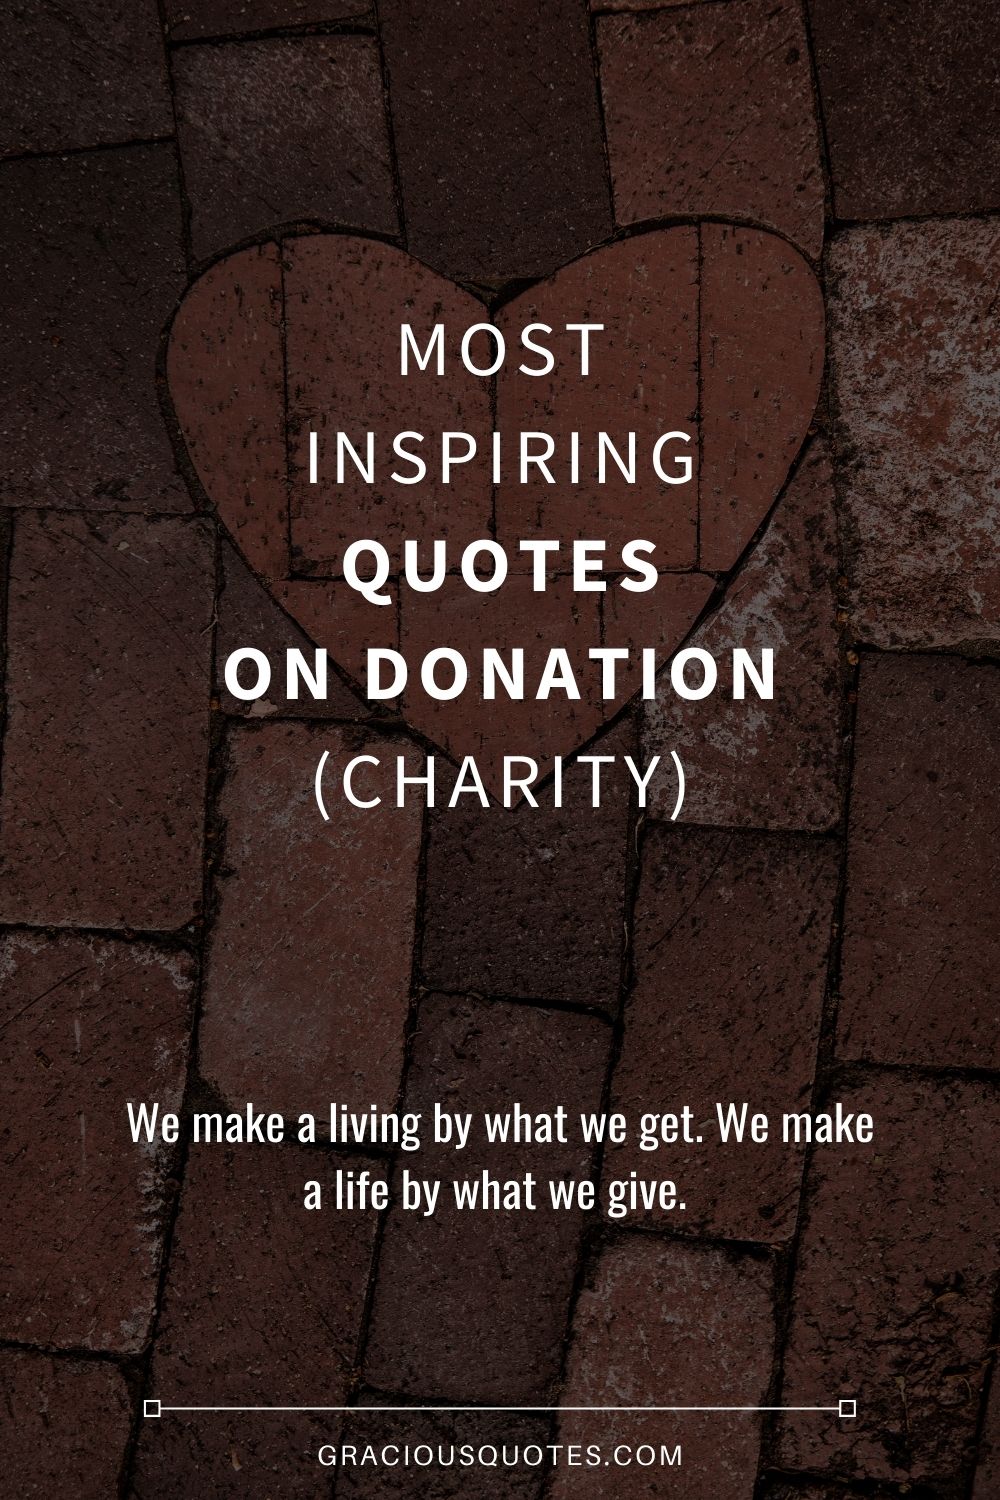 Most Inspiring Quotes on Donation (CHARITY) - Gracious Quotes